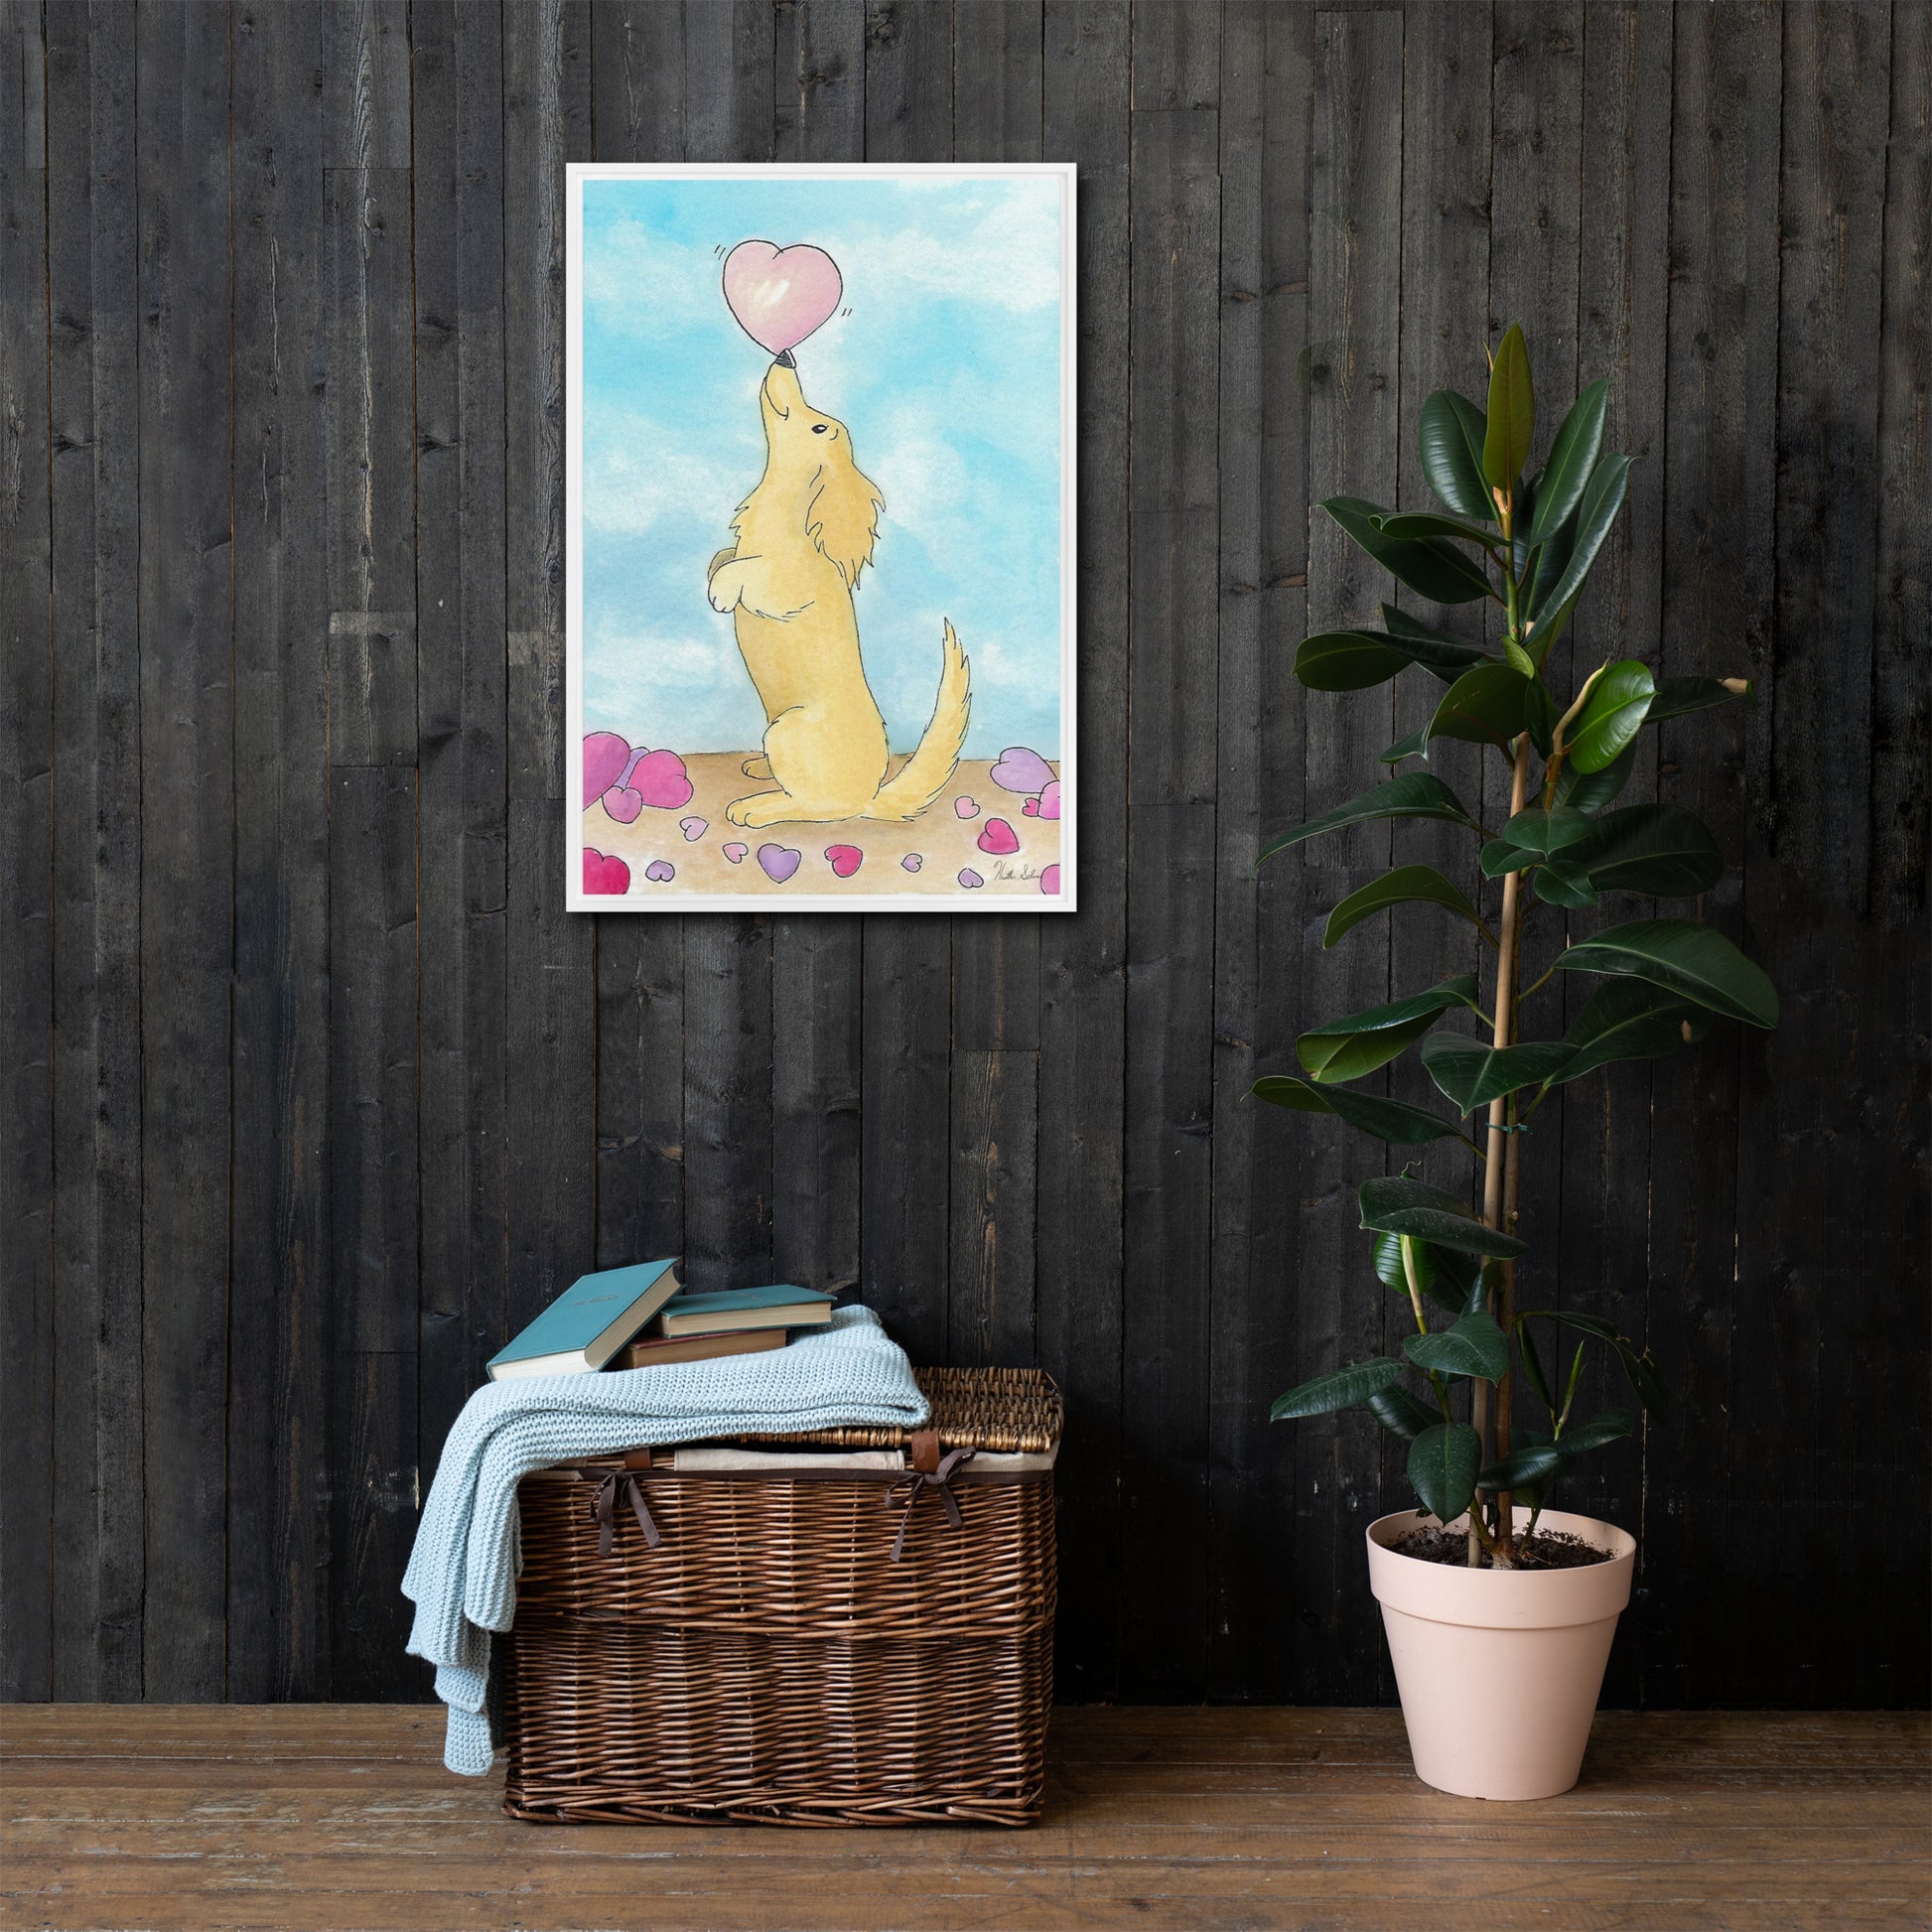 20 by 30 inch framed canvas Puppy Love print. The canvas is in a white pine wood frame. Shown on dark wood wall above wicker basket and potted plant.